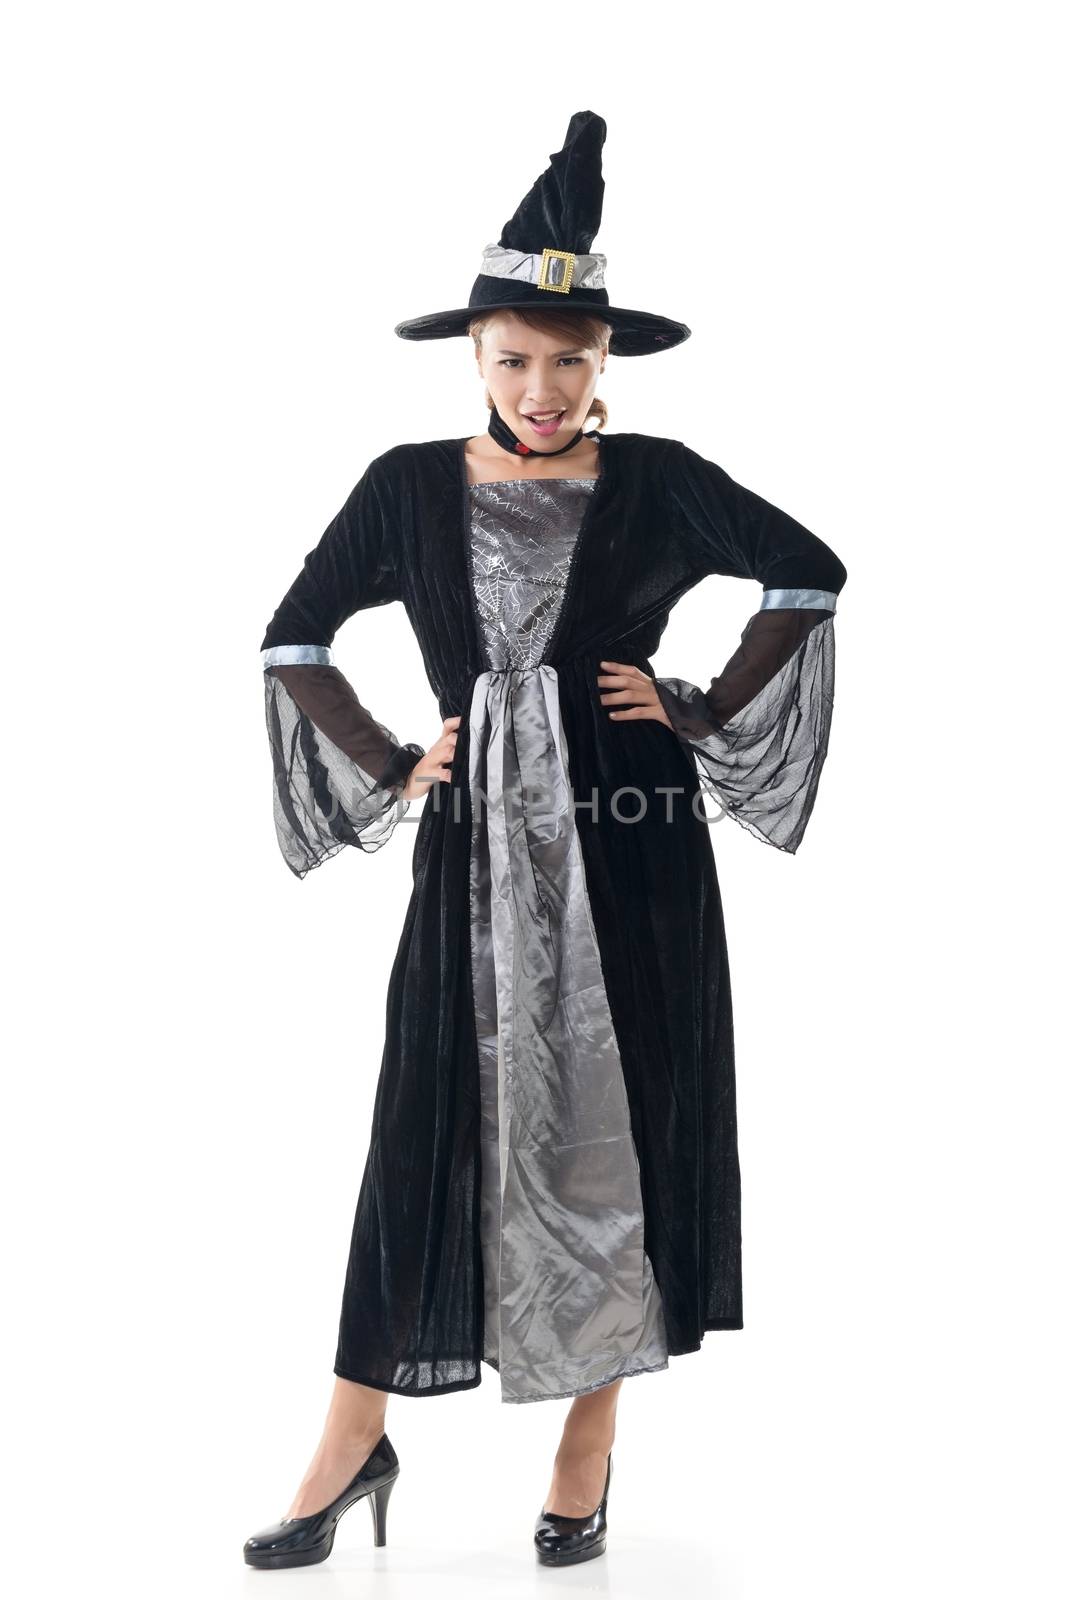 Asian witch woman, full length portrait isolated on white.